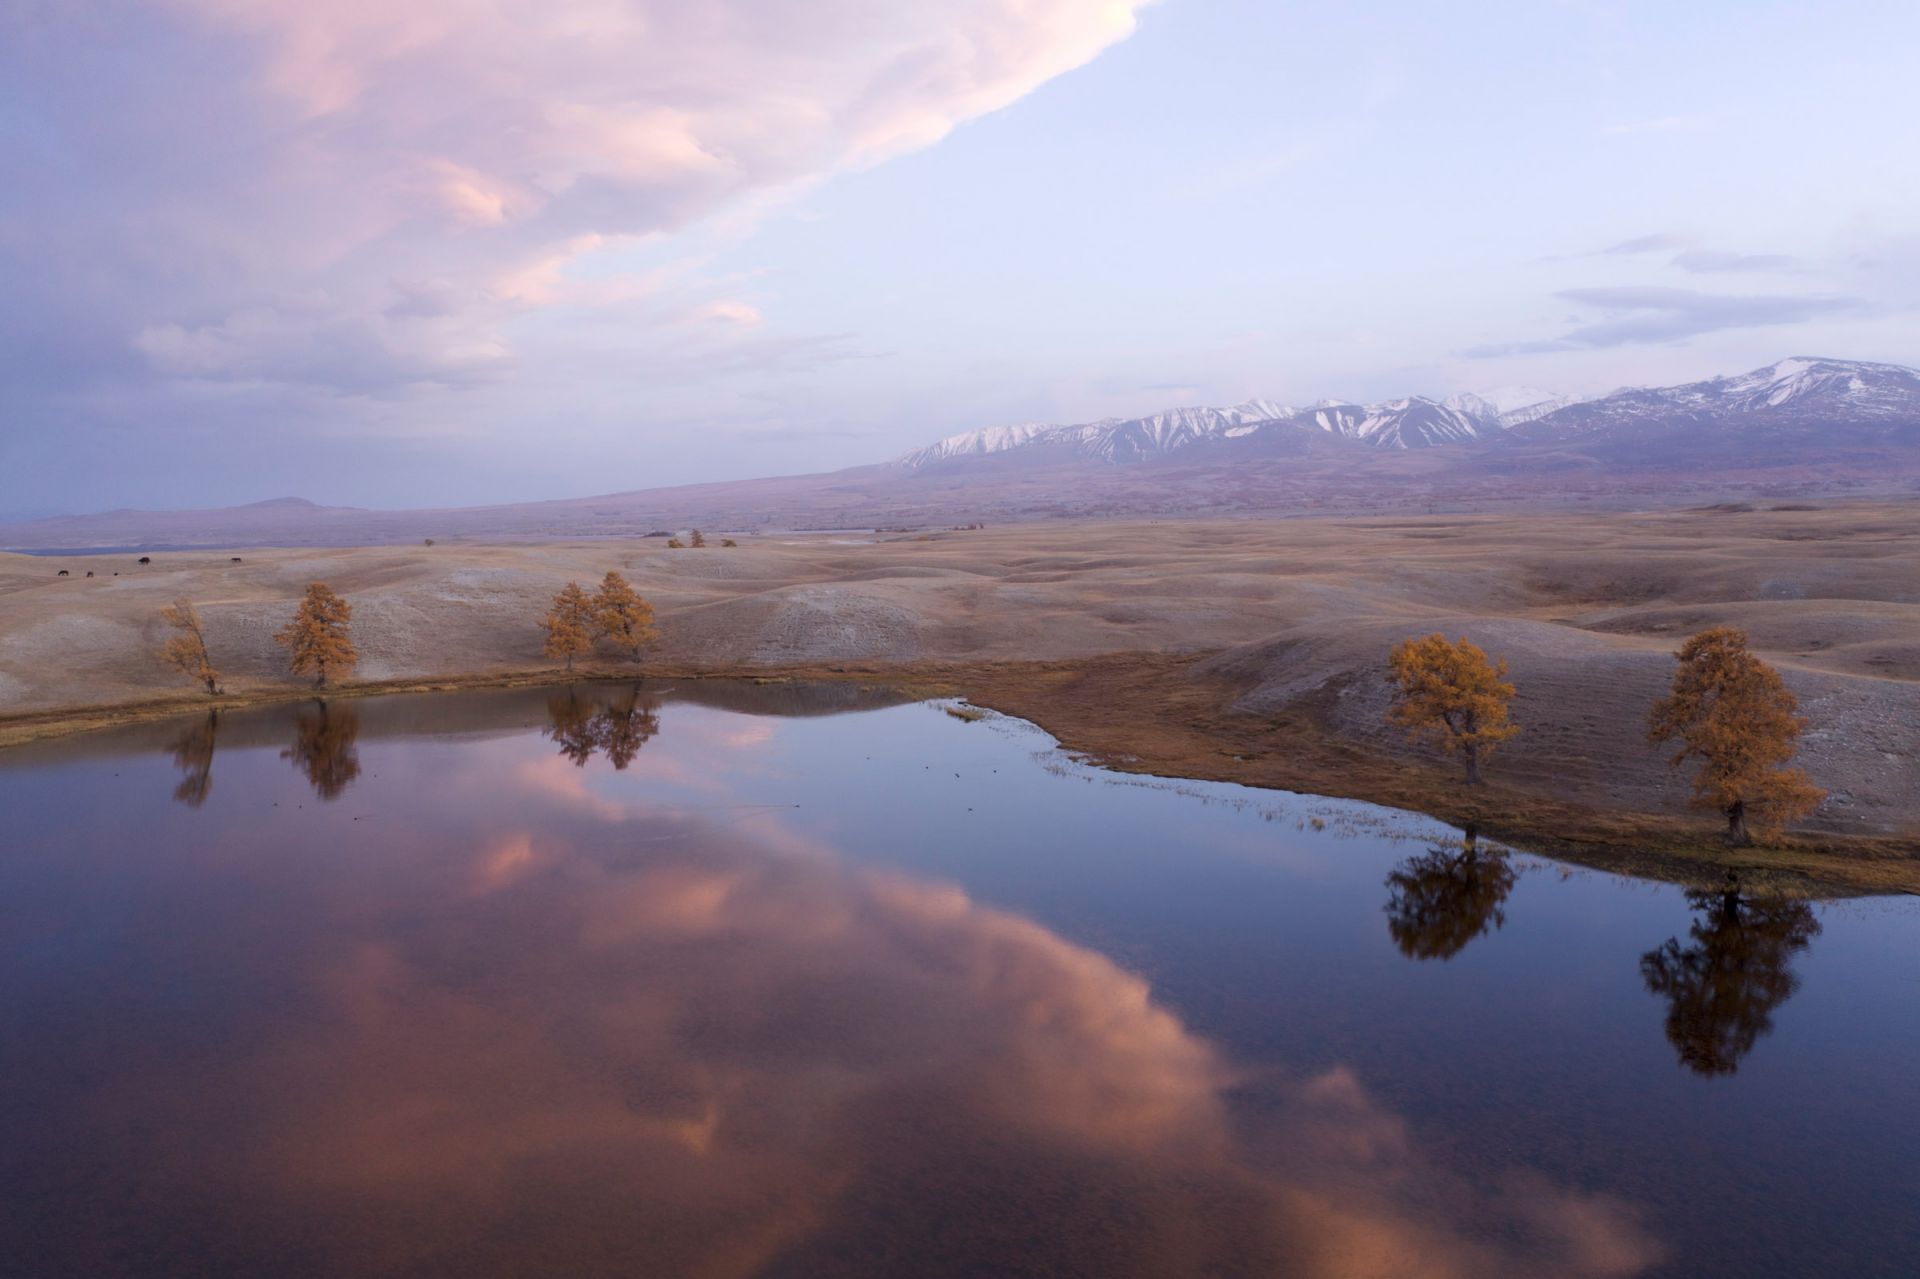 Top places to visit in Mongolia: Altai Tavan Bogd National Park. Home of Eagle Hunters and majestic mountains